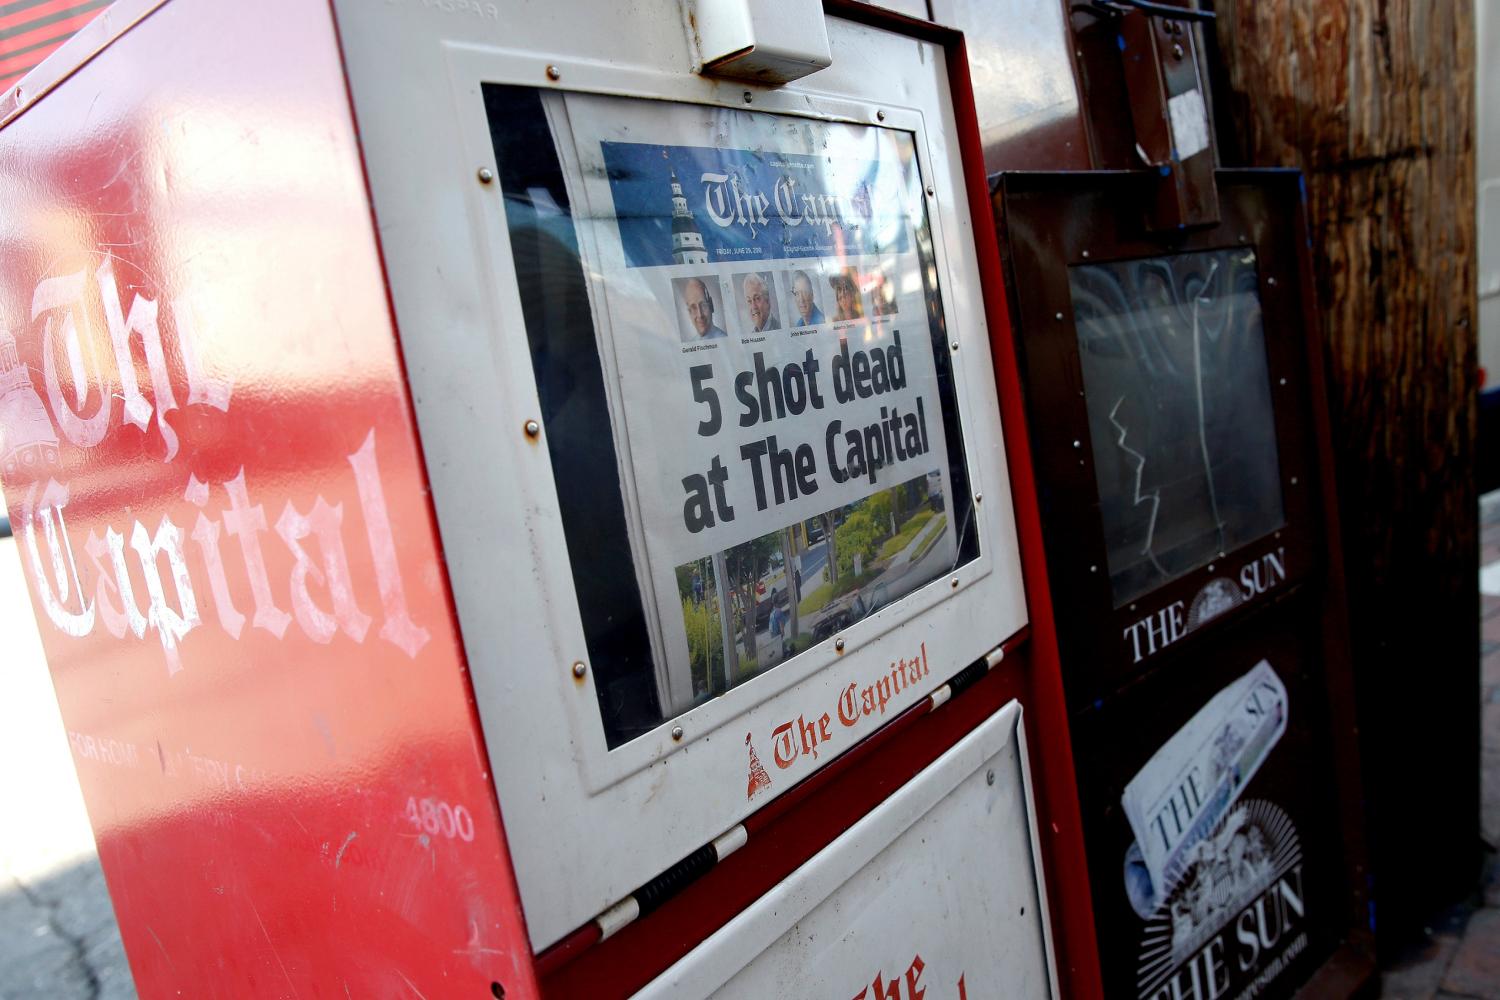 A copy of the Capital Gazette is displayed in a newspaper box the day after a gunman killed five people and injuring several others at the publication's offices in Annapolis, Maryland, U.S., June 29, 2018. REUTERS/Joshua Roberts - RC1B67B7C9D0